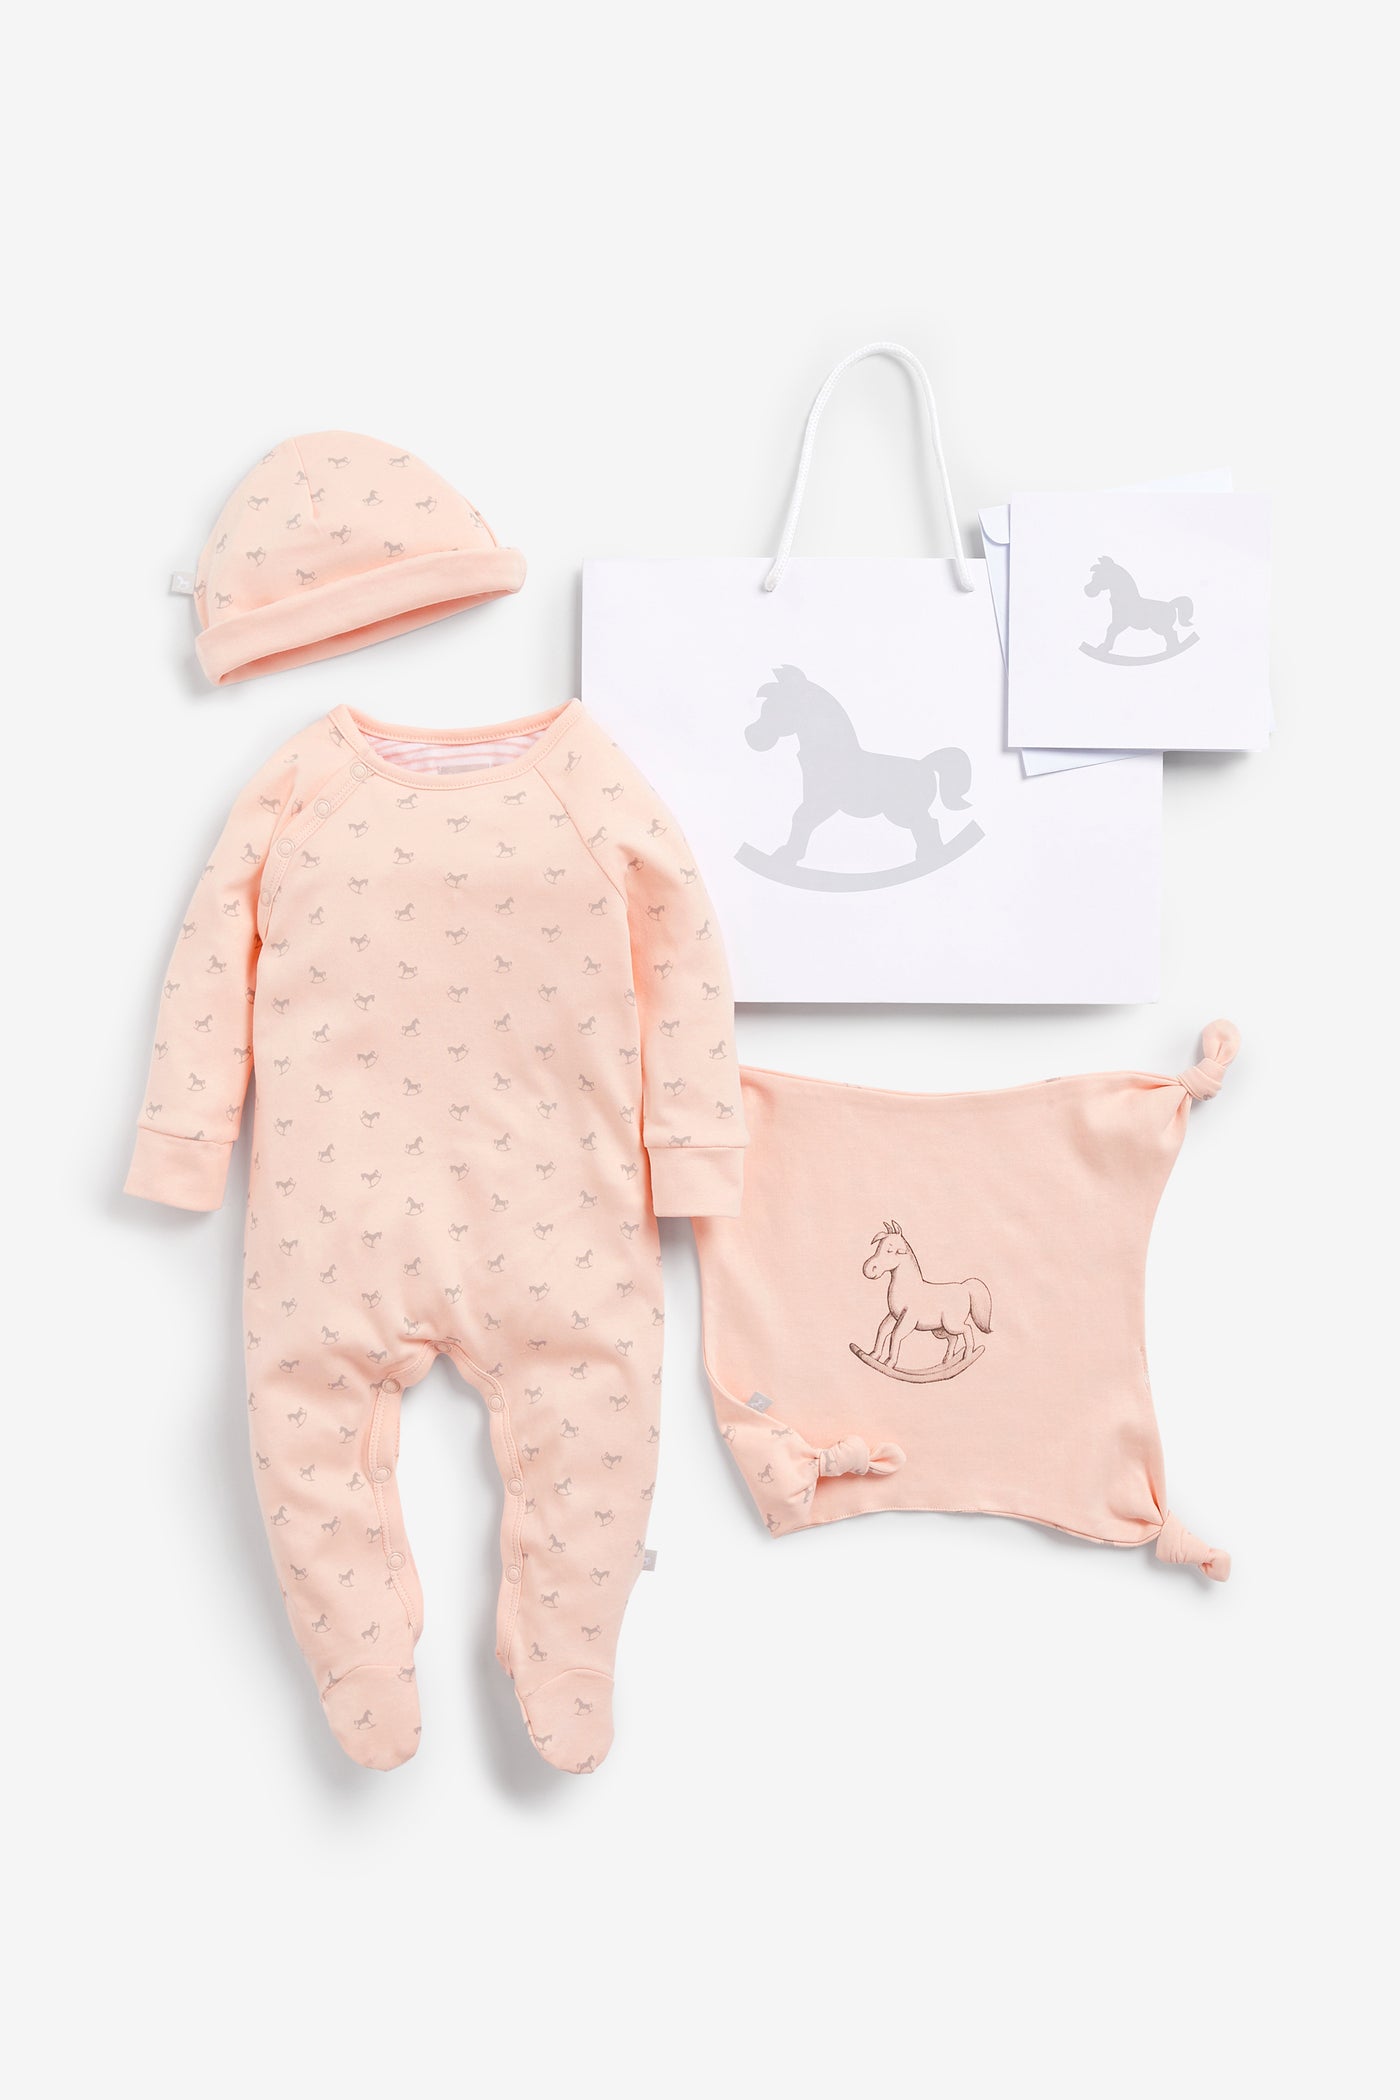 Super Soft Jersey Sleep Suit, Hat And Comforter Gift Set- pink